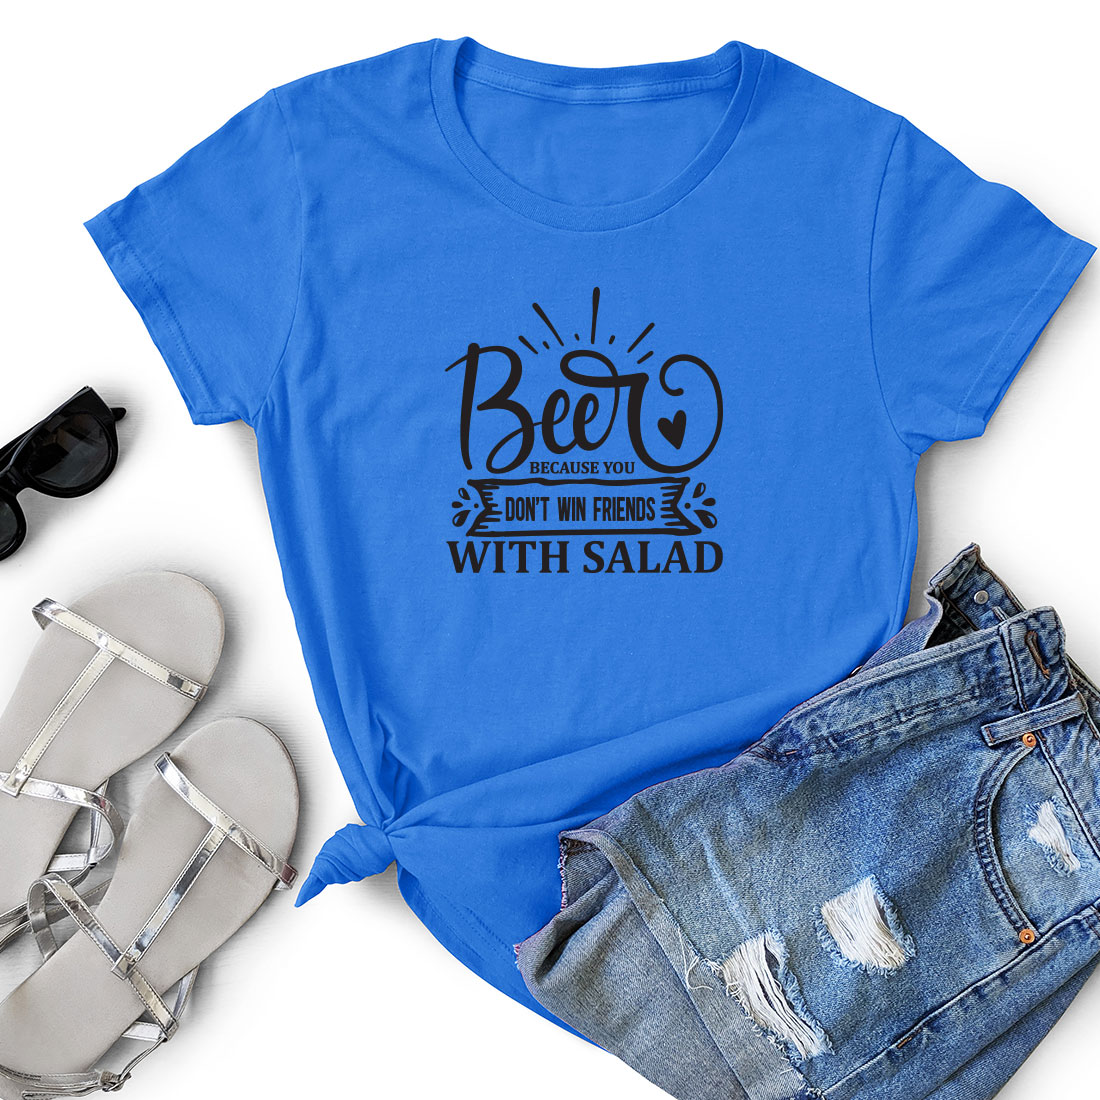 Women's t - shirt with the words beer and a pair of shorts.